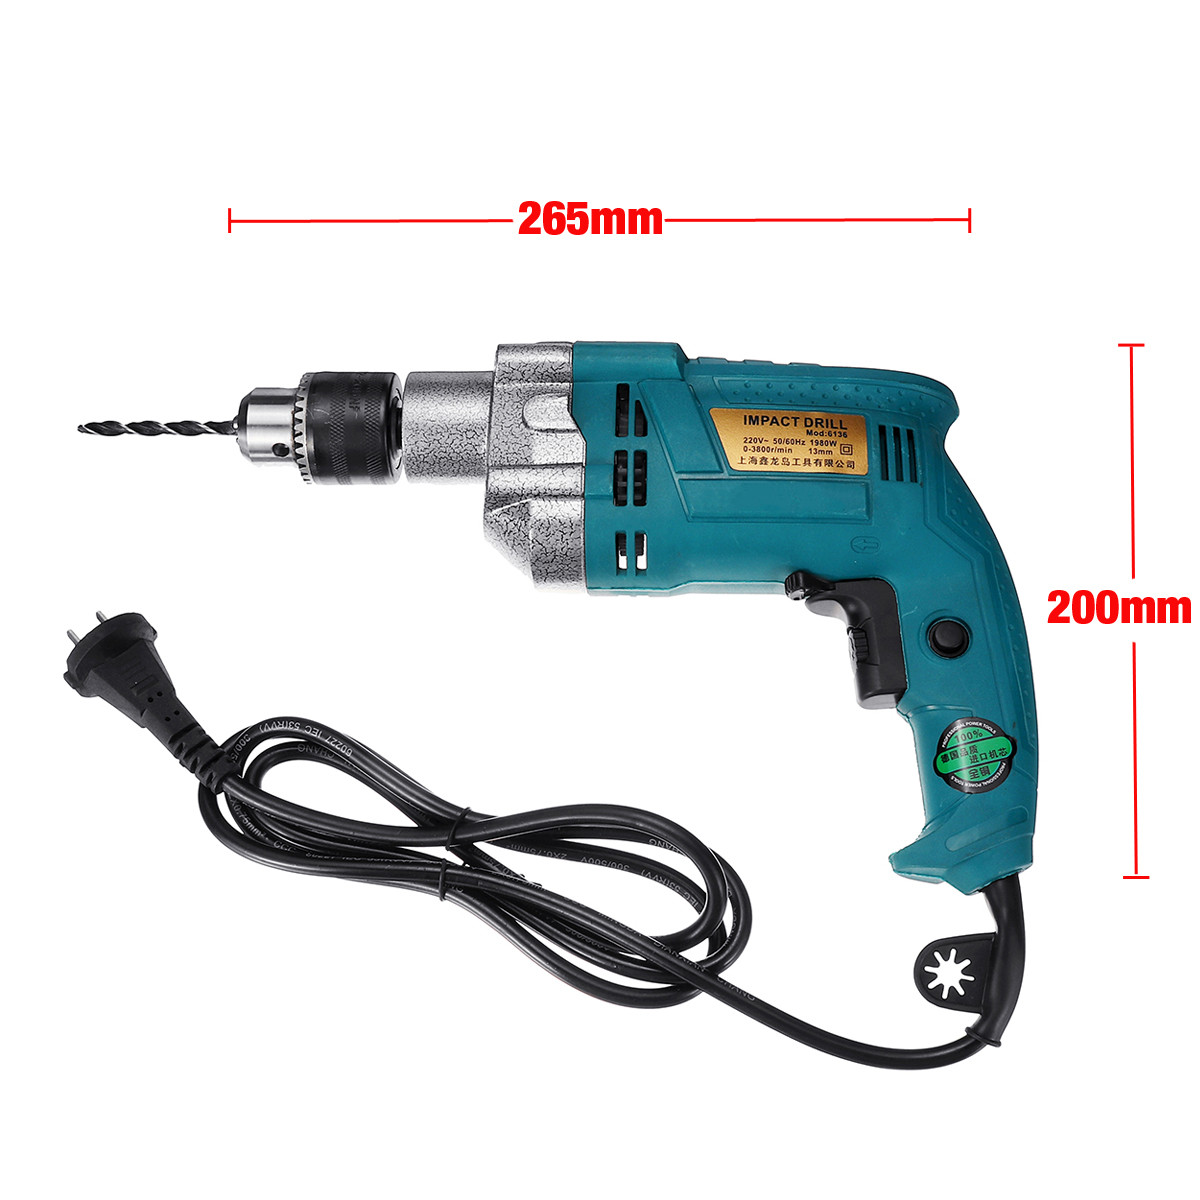 32Pcs-Set-1980W-3800RPM-Electric-Impact-Drill-Screwdriver-Household-Electric-Flat-Drill-Grinding-1466059-3